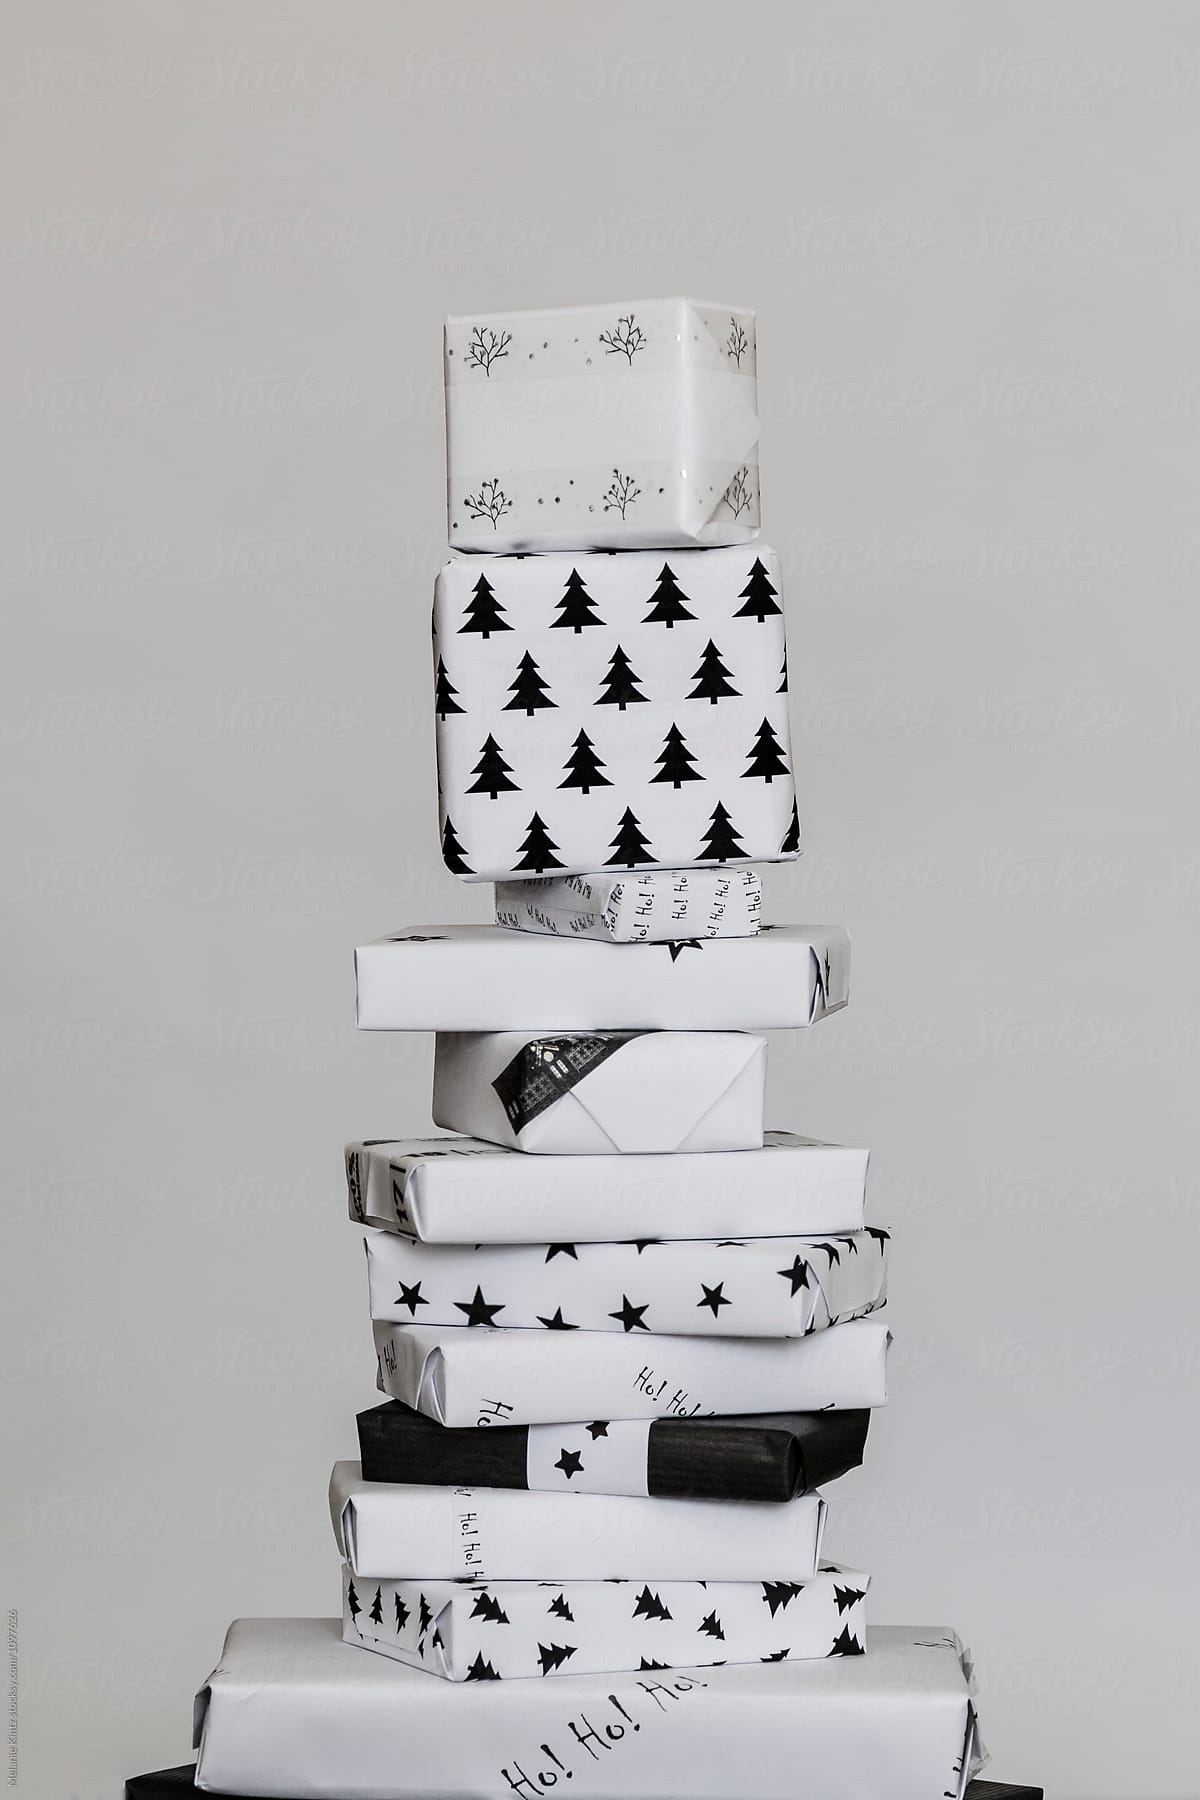 Tall stack of Christmas gifts wrapped in black and white